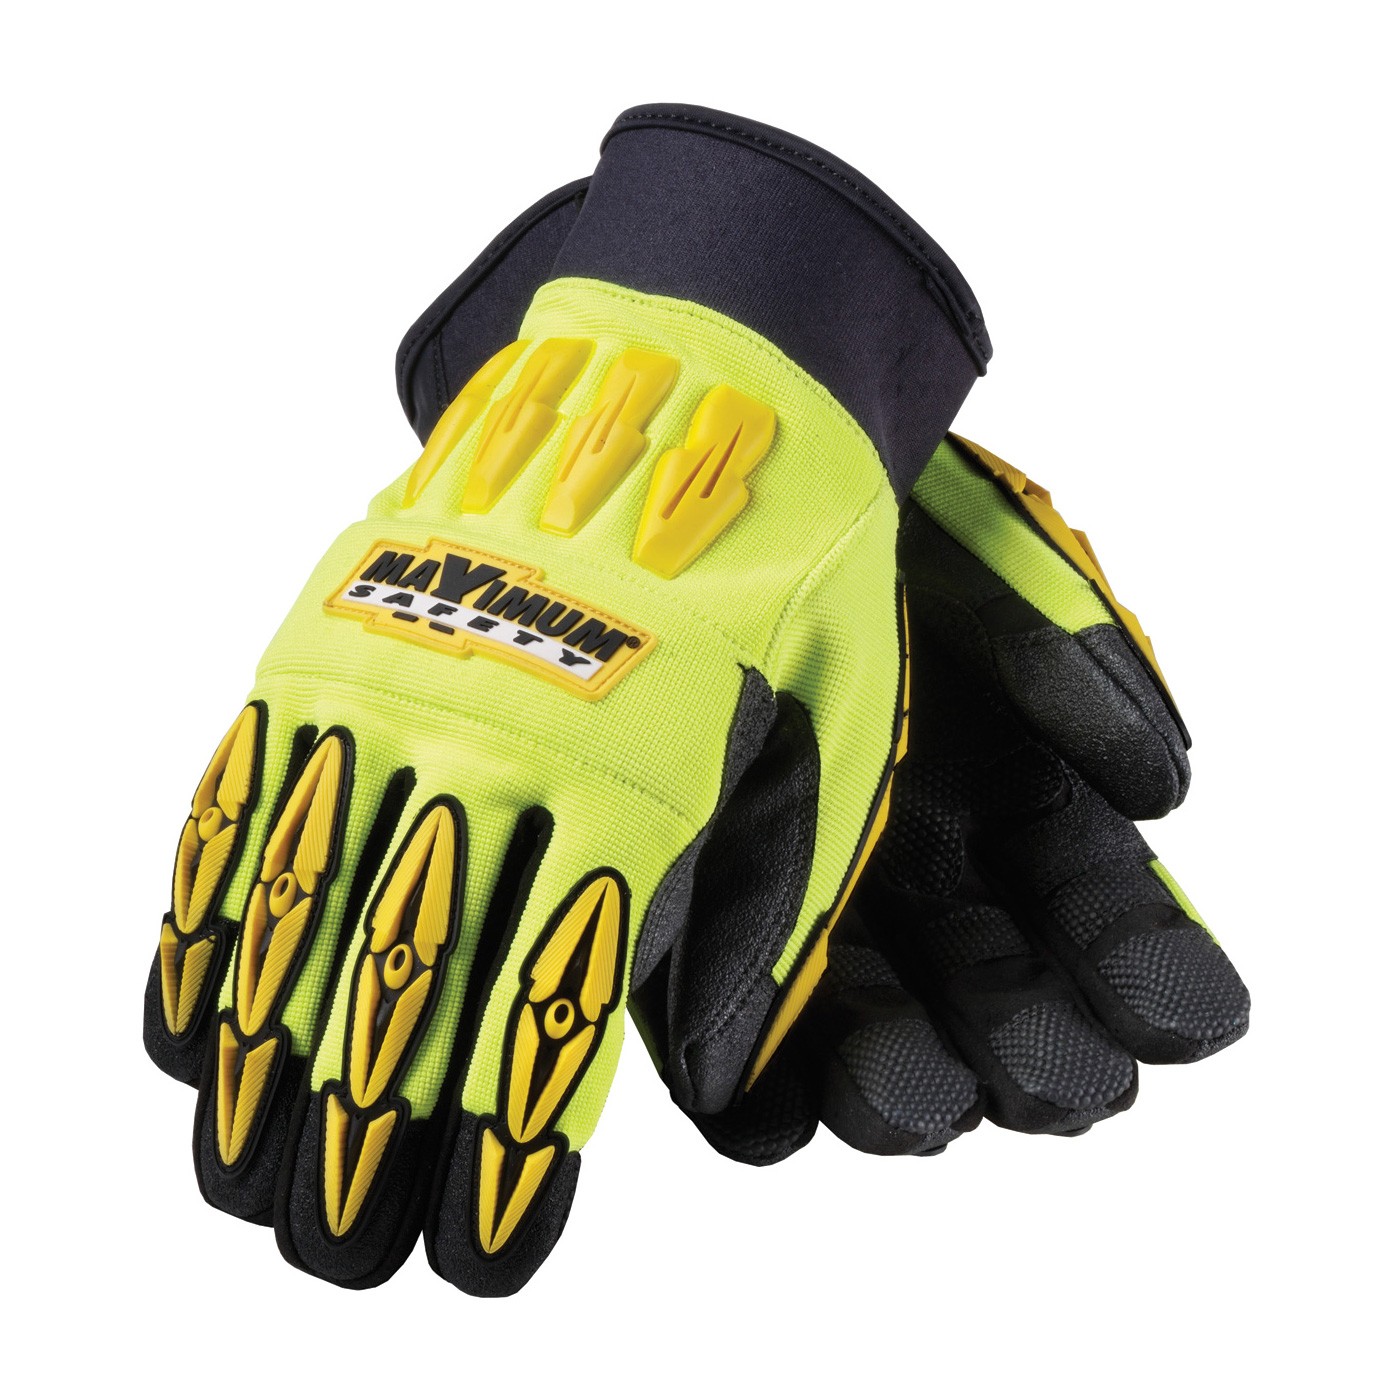 MAD MAX, HV Ylw, Blk. Reinforced Synthetic Leather Palm Size Medium